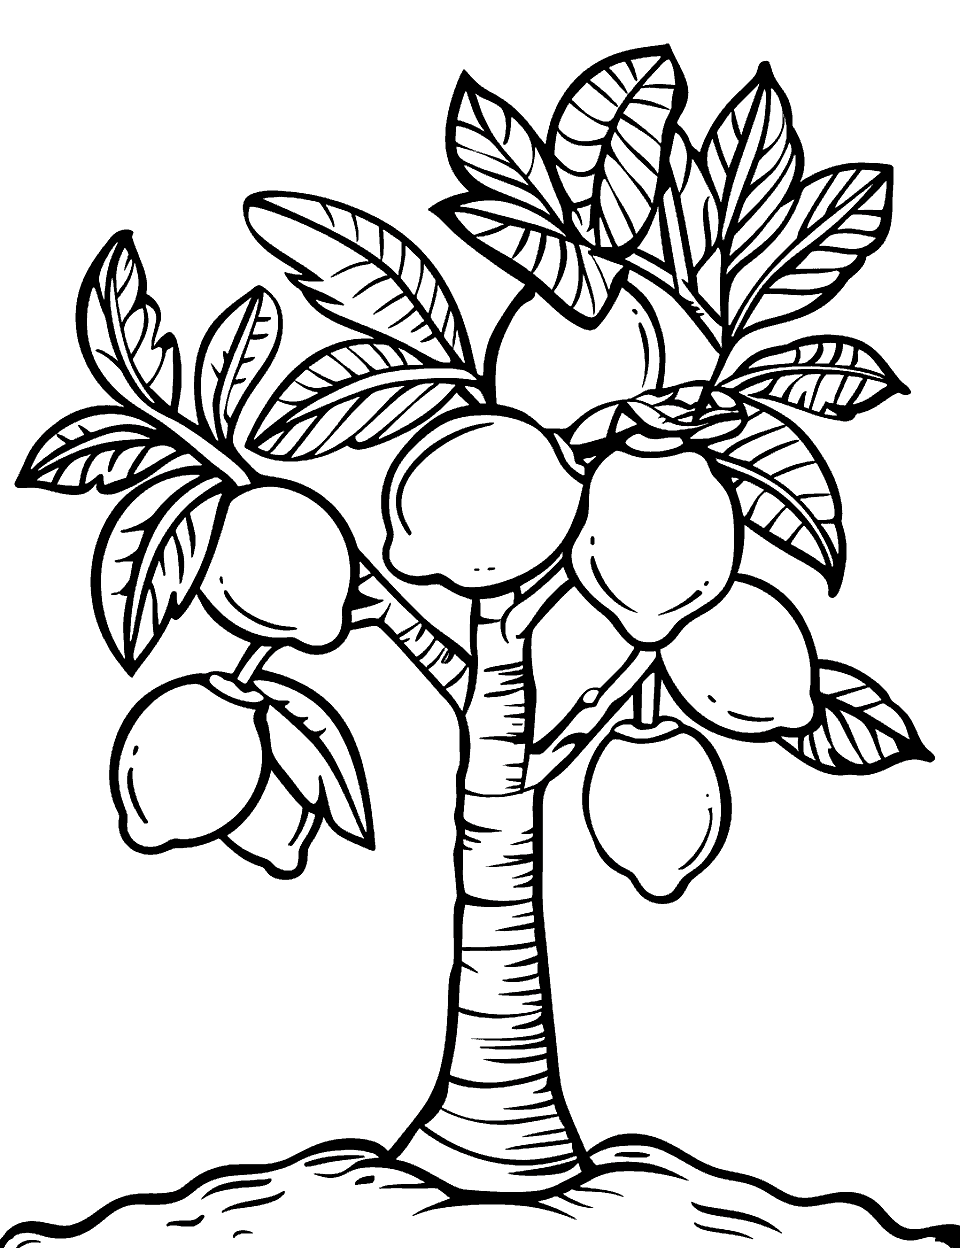 Summer Lemon Tree Coloring Page - A lemon tree with lemons ready for picking.